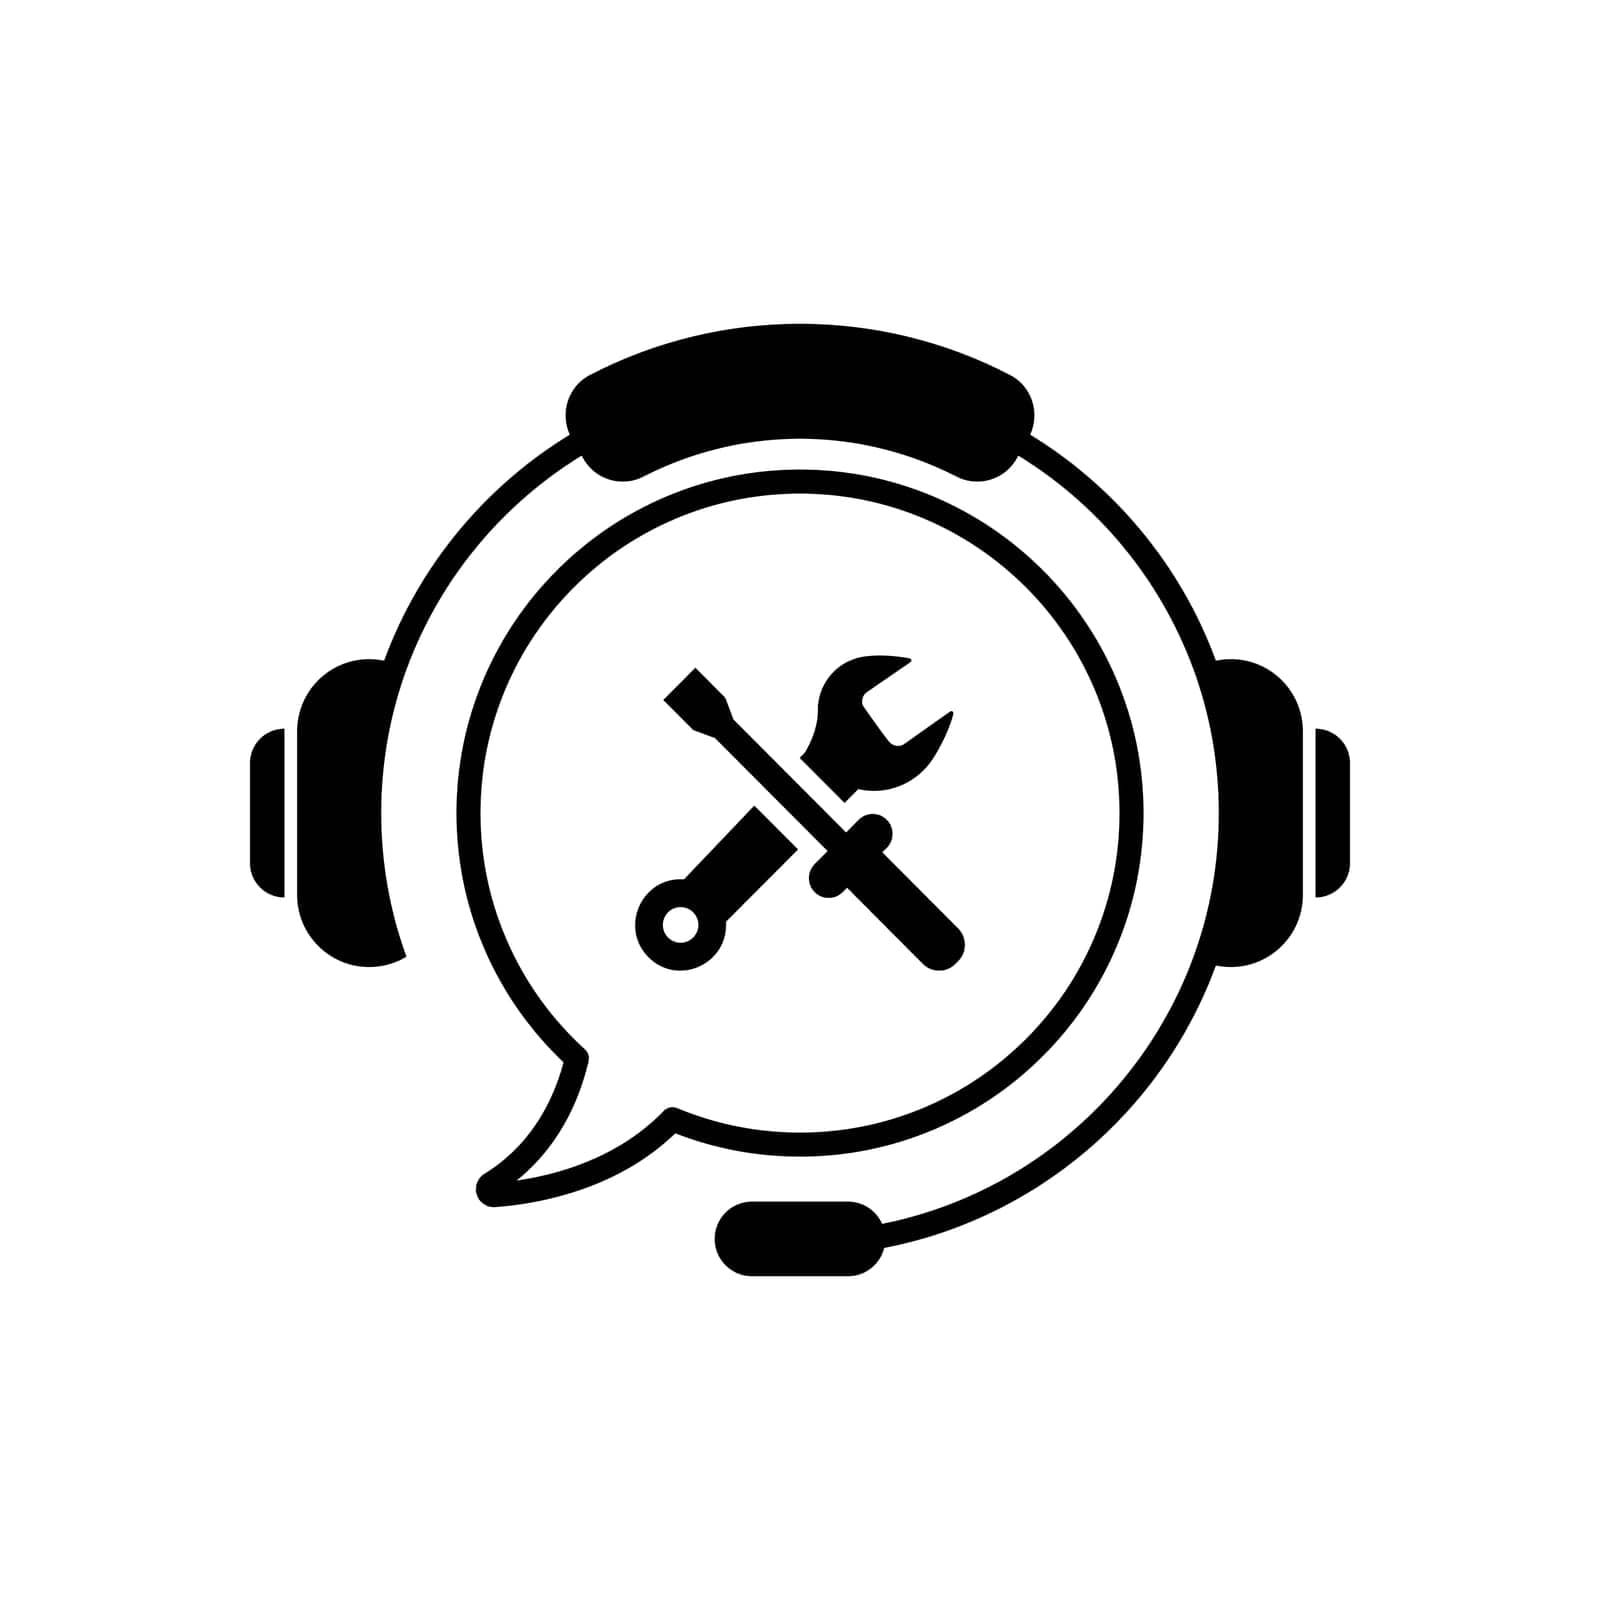 Technical Support Customer Service Line Icon. Headphones and Repair Tools Outline Pictogram. Online Information Hotline and Customer Helpline. Vector Illustration.